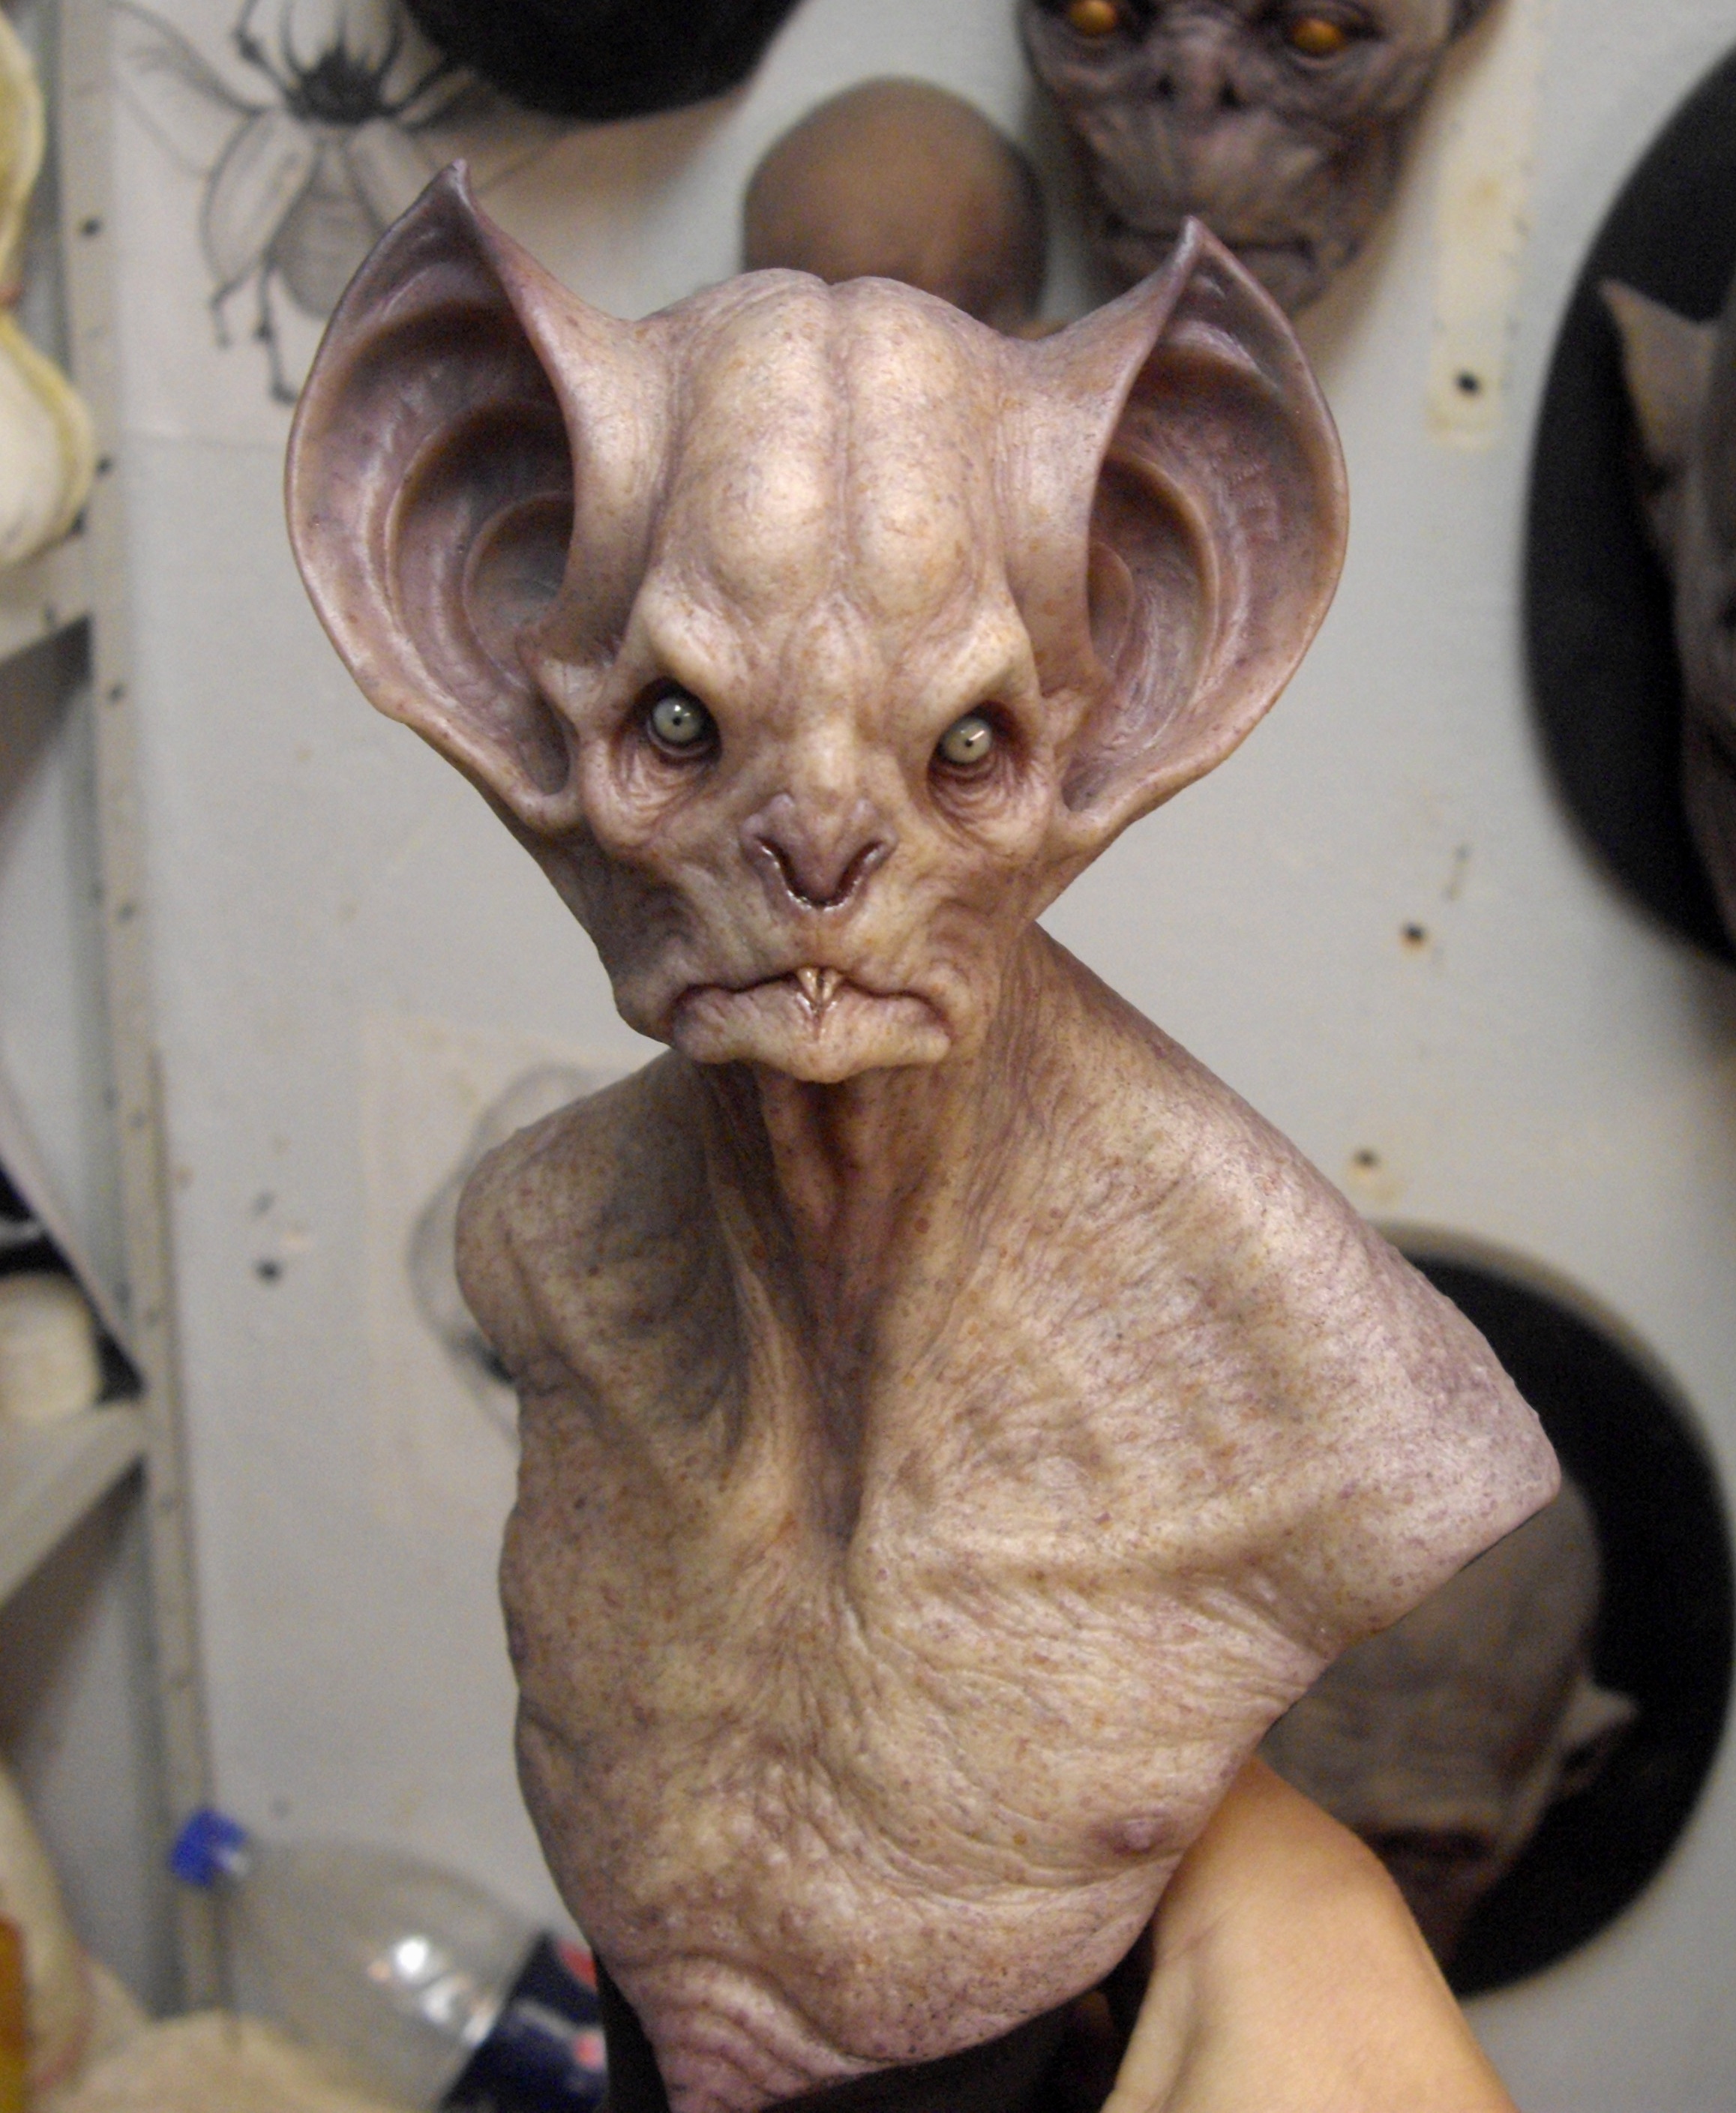 bust sculpture of a bat-like montser with gigantic ears